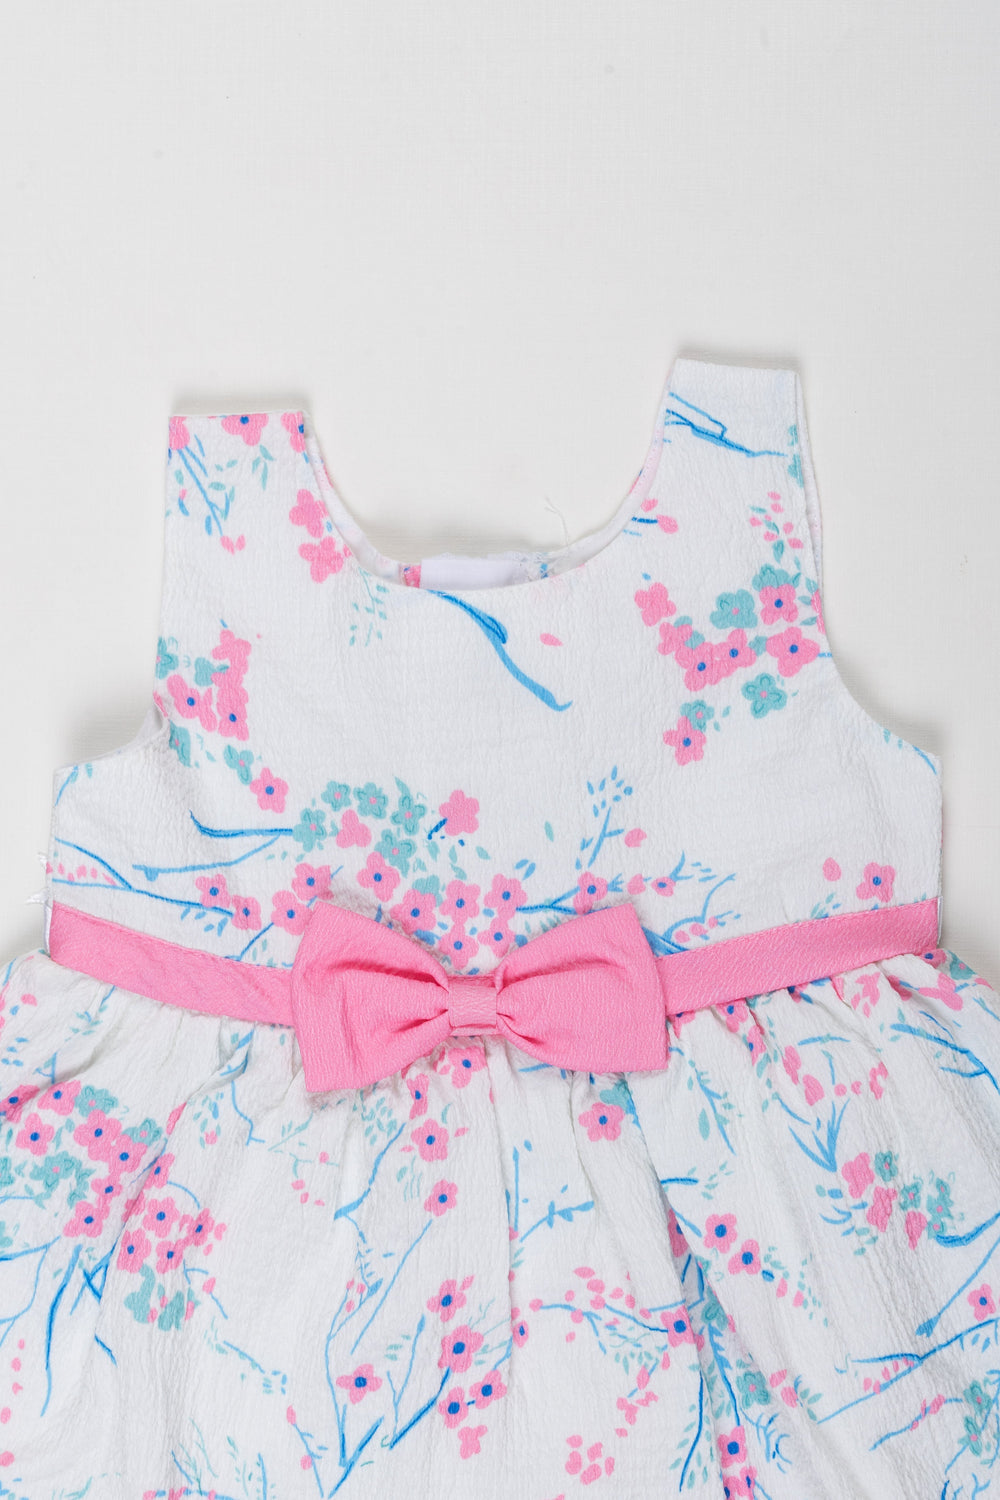 The Nesavu Baby Fancy Frock Blossom Pink Bow Cotton Frock for Charming Baby Girls Nesavu Buy Baby Girl Floral Cotton Frock | Pink Bow Detail | The Nesavu